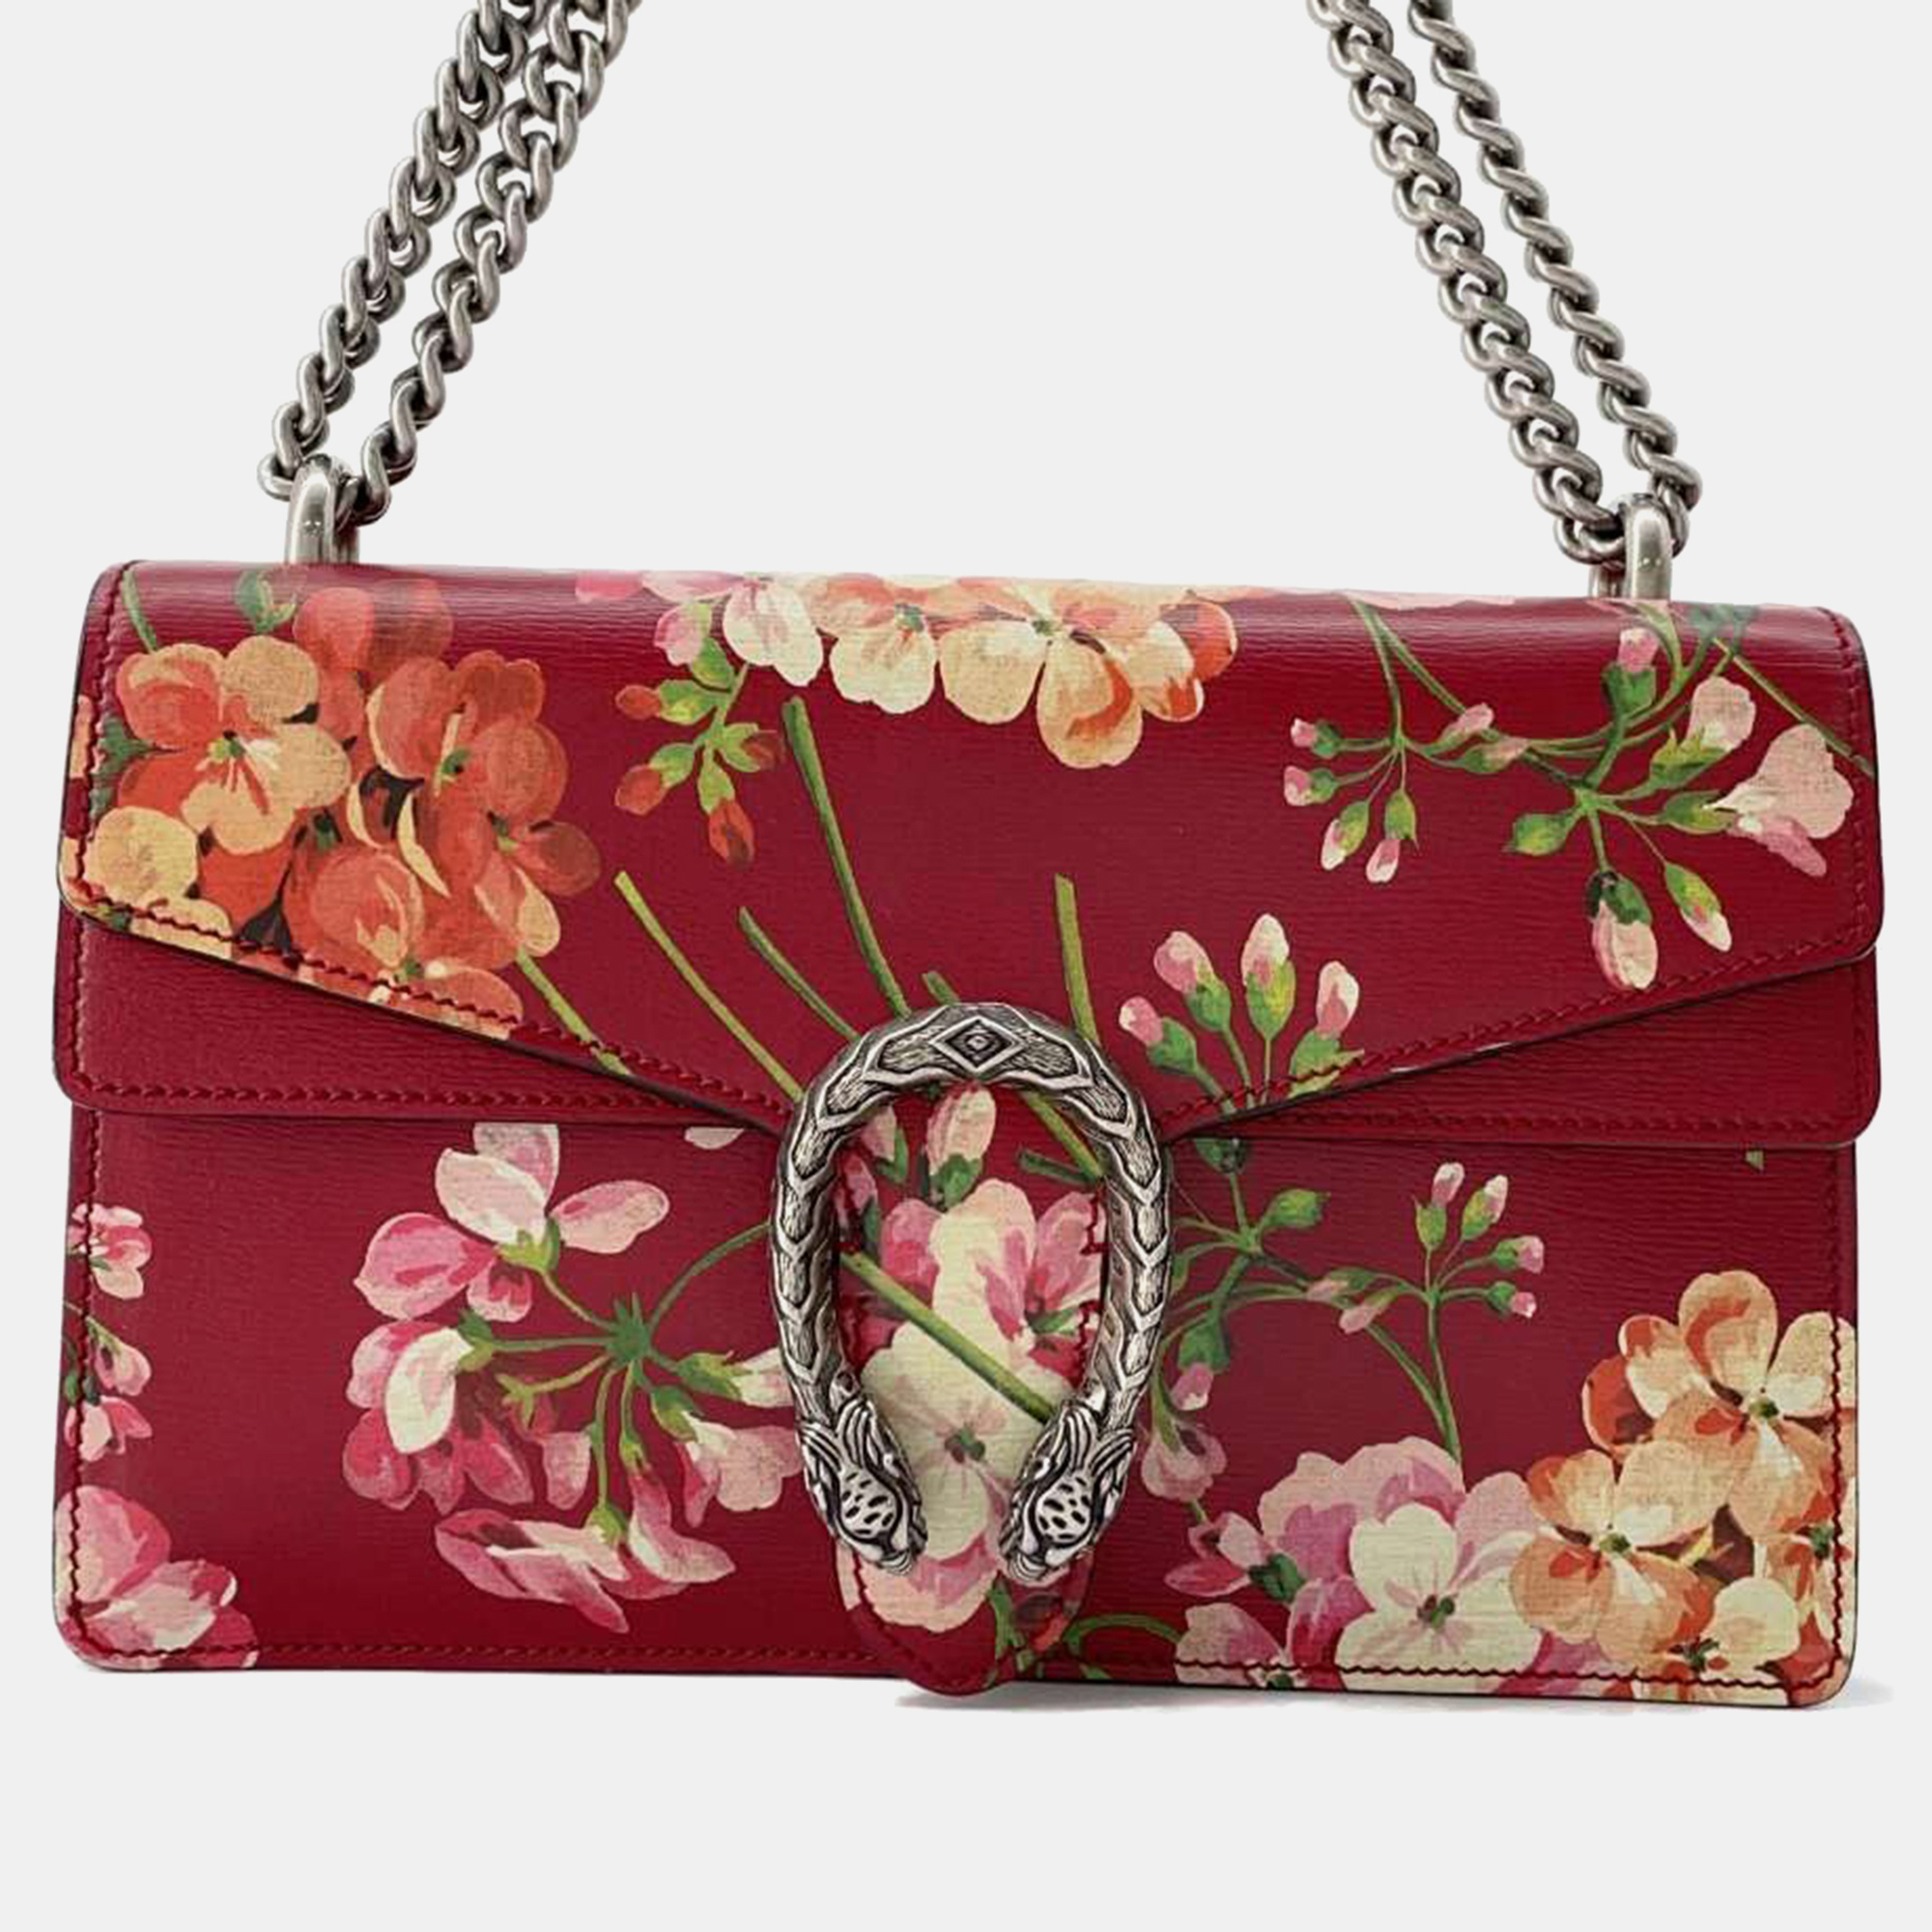 Gucci red leather dionysus blooms chain shoulder bag